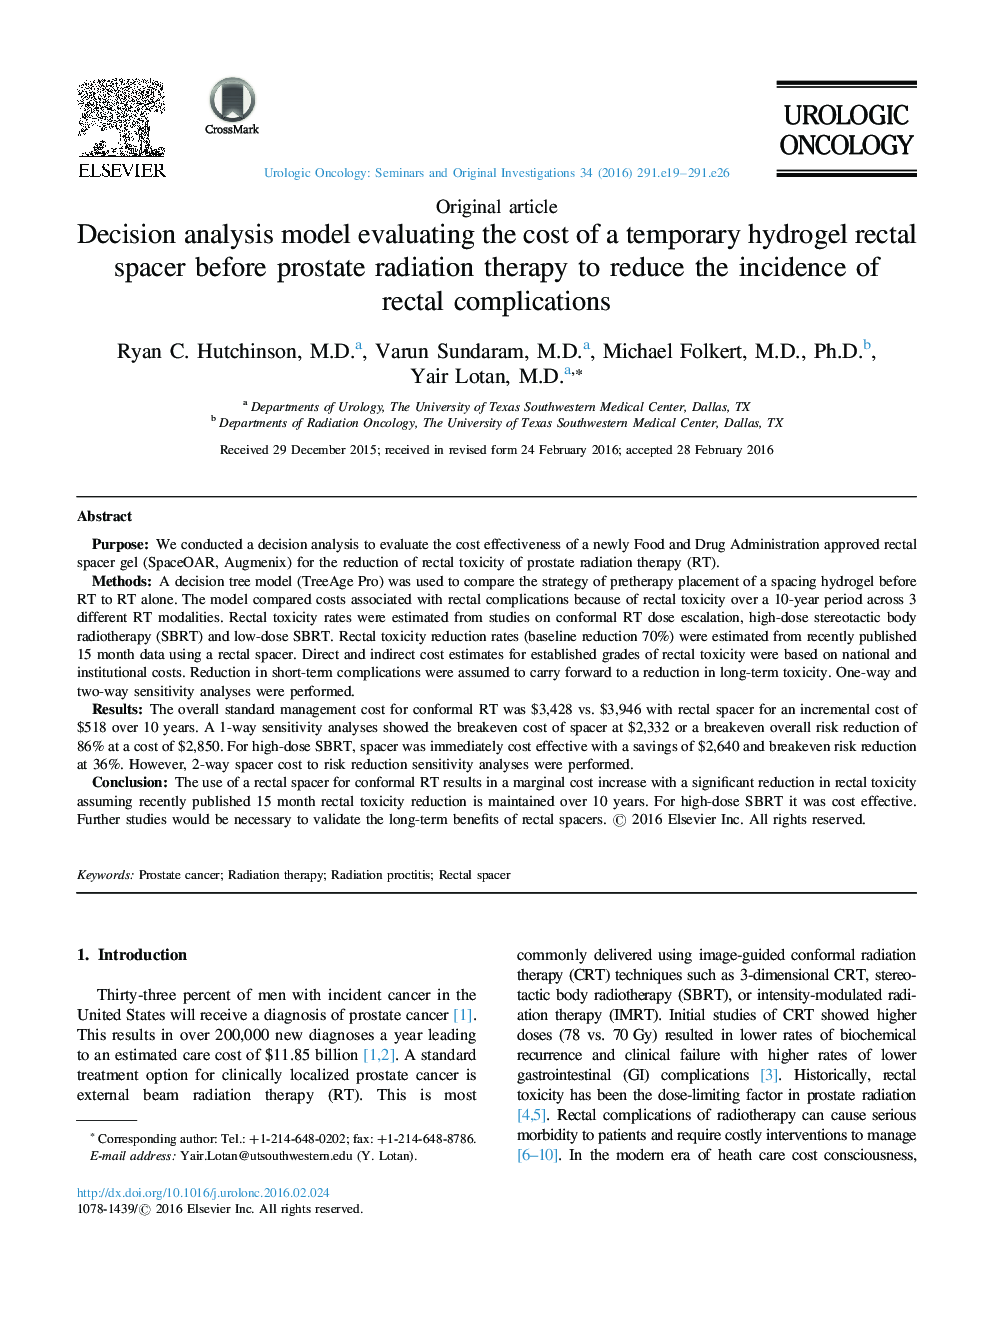 Decision analysis model evaluating the cost of a temporary hydrogel rectal spacer before prostate radiation therapy to reduce the incidence of rectal complications